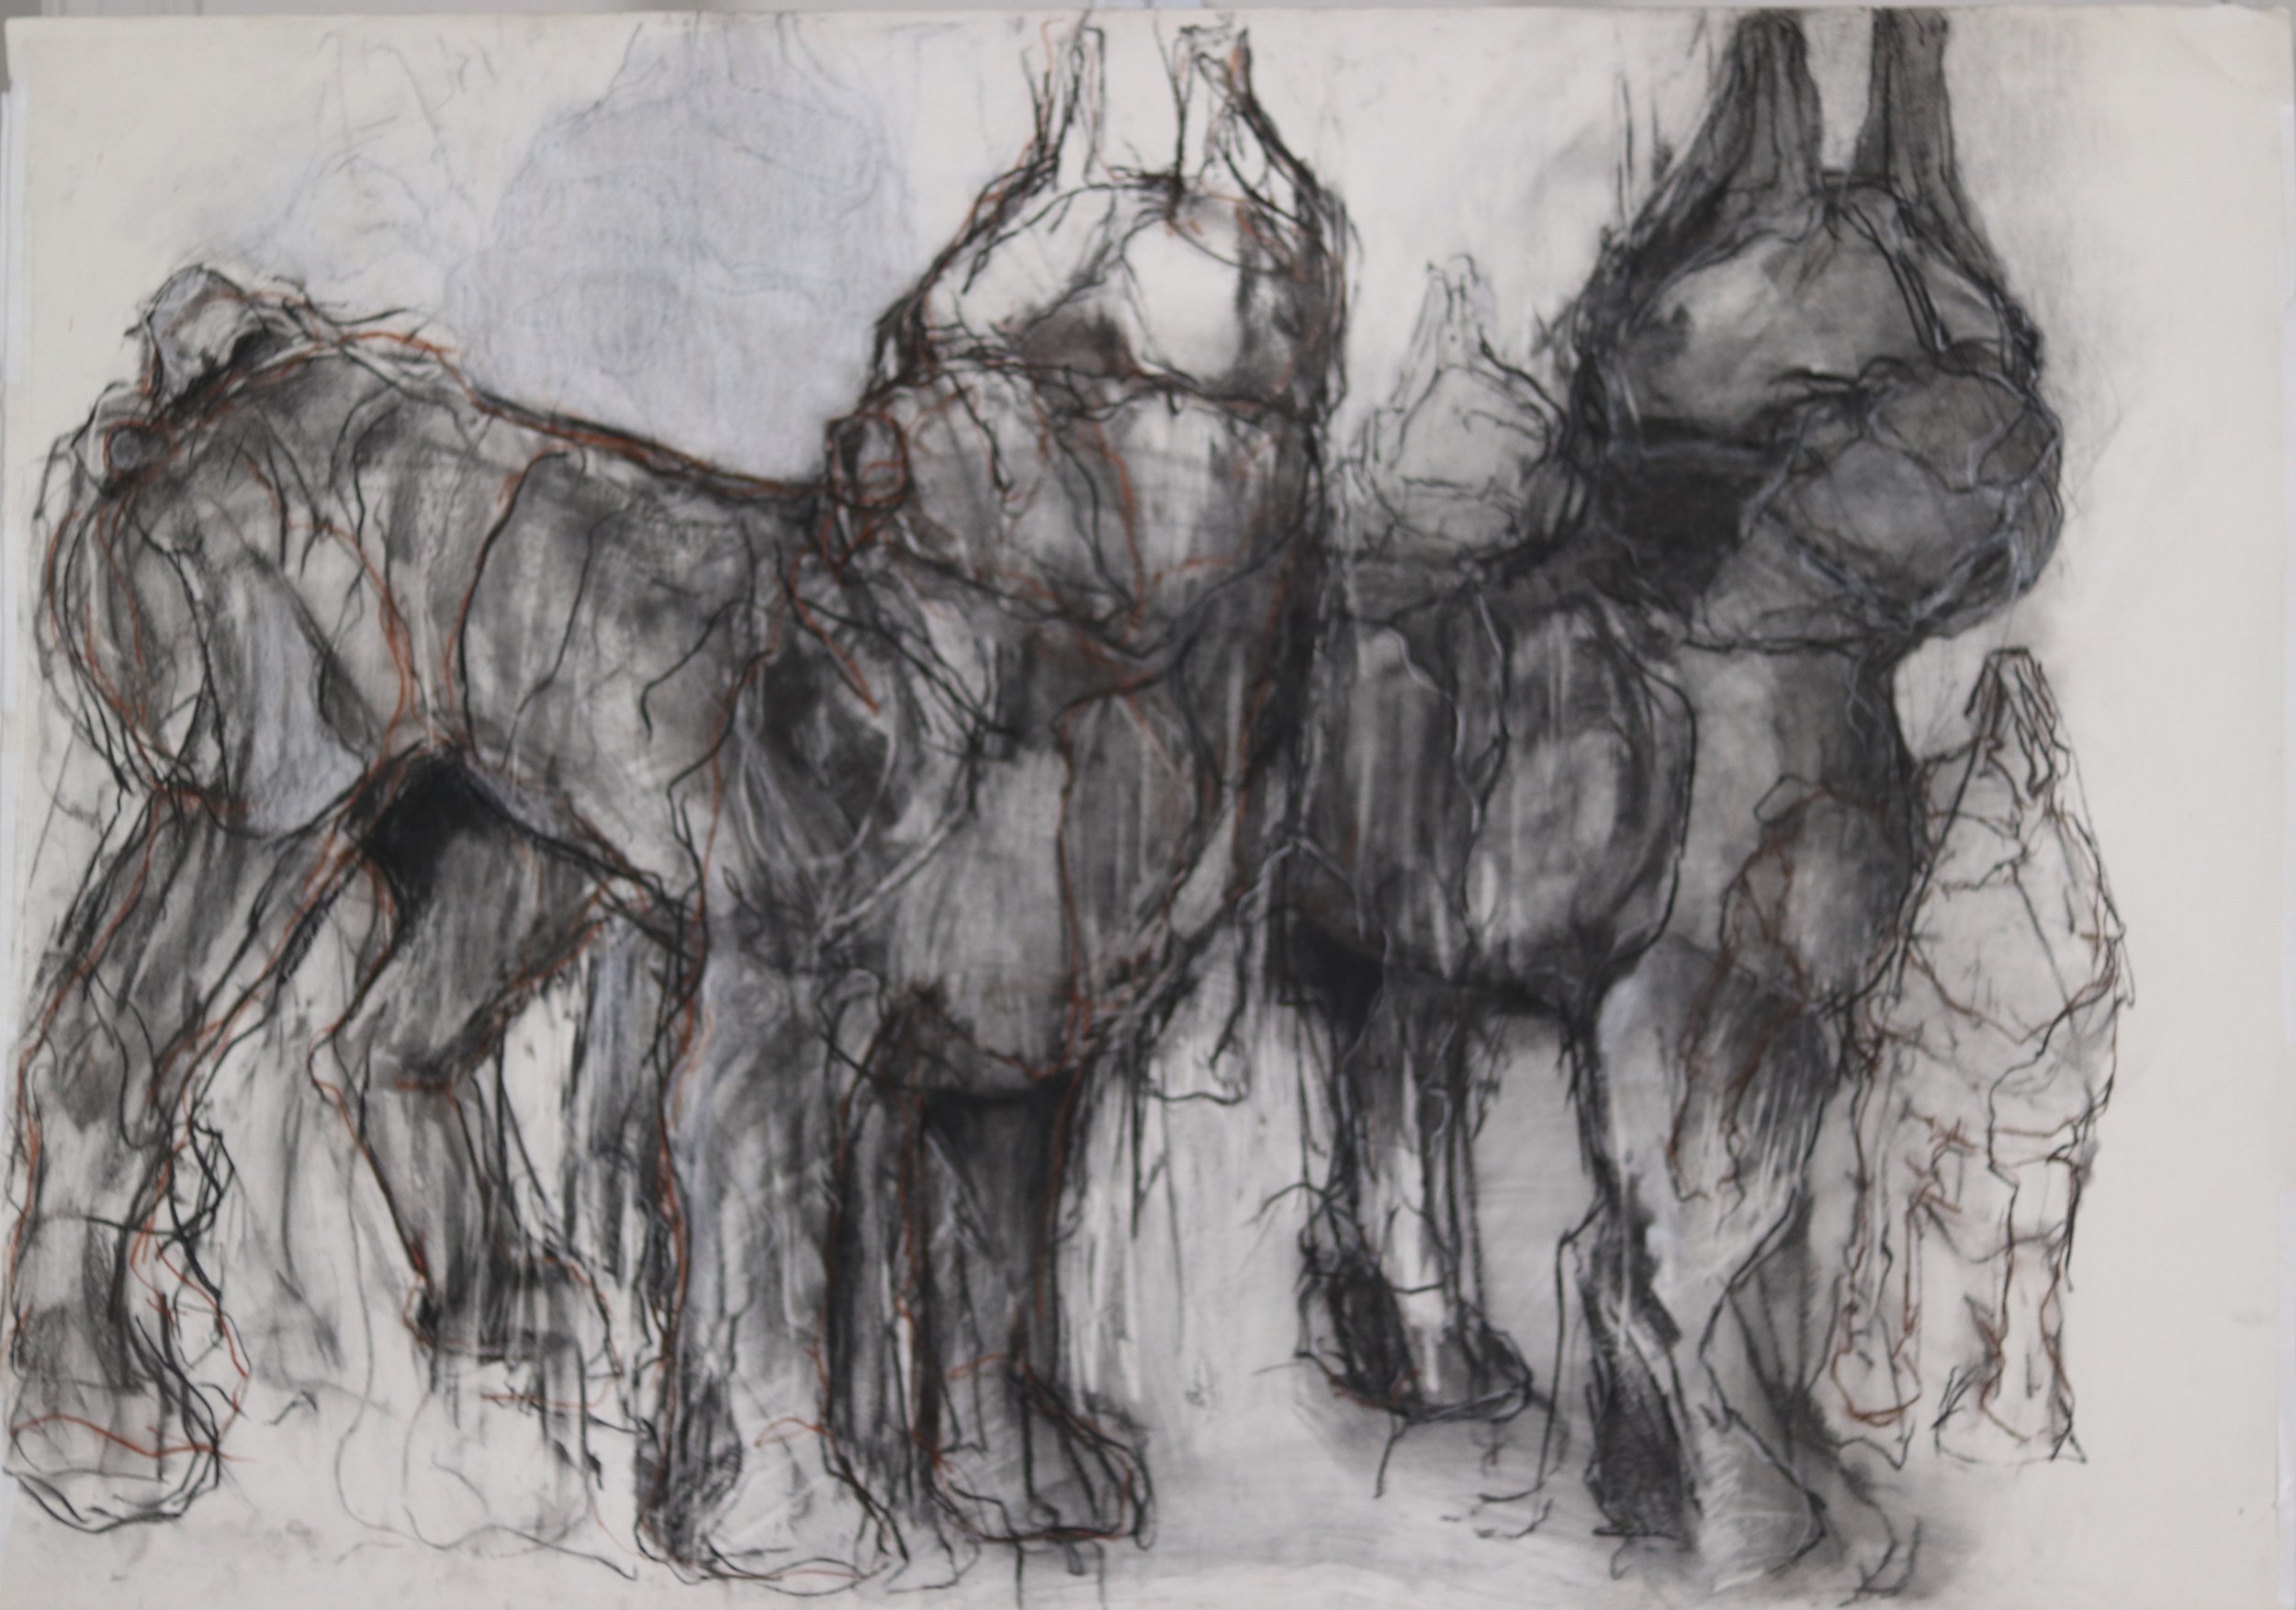  Dogs  Charcoal on Paper  42 x 60 